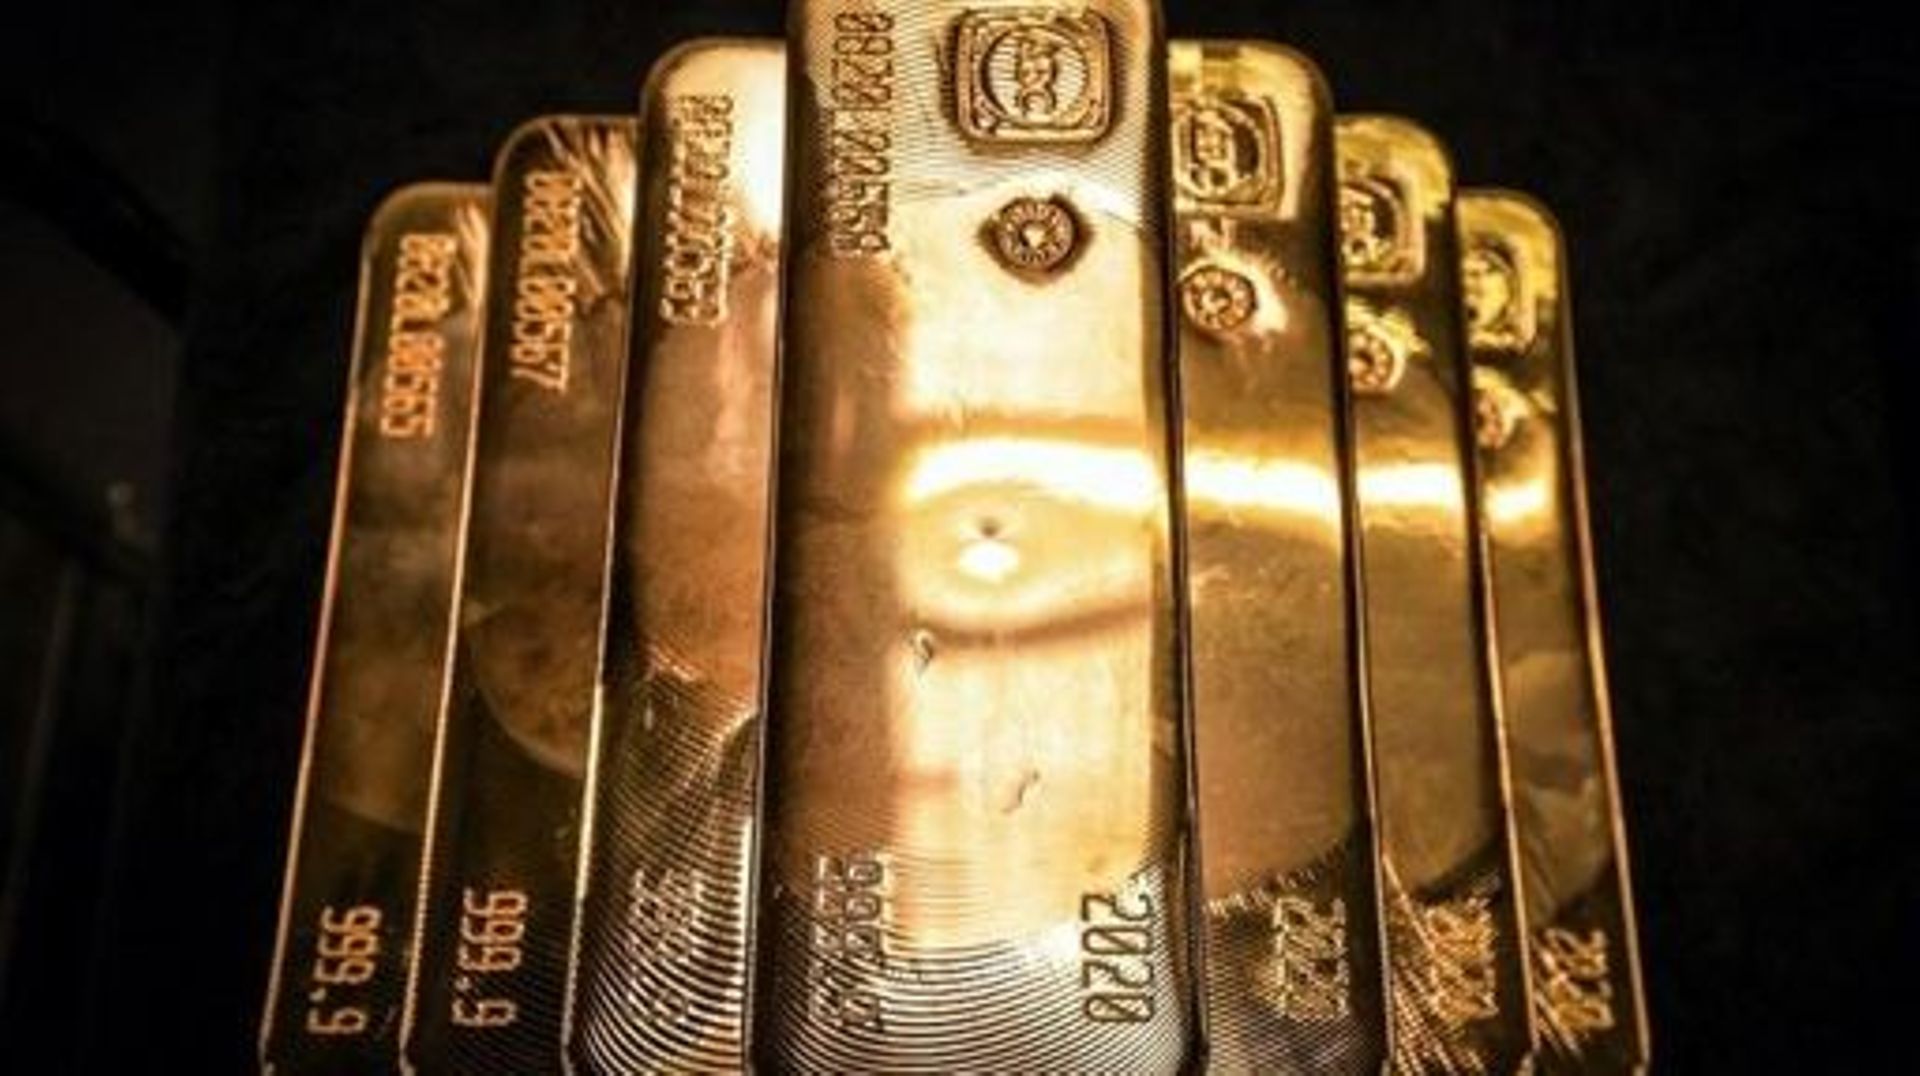 Gold bullion bars are pictured after being inspected and polished at the ABC Refinery in Sydney on August 5, 2020. Gold prices hit 2,000 USD an ounce on markets for the first time on August 4, the latest surge in a commodity seen as a refuge amid economic